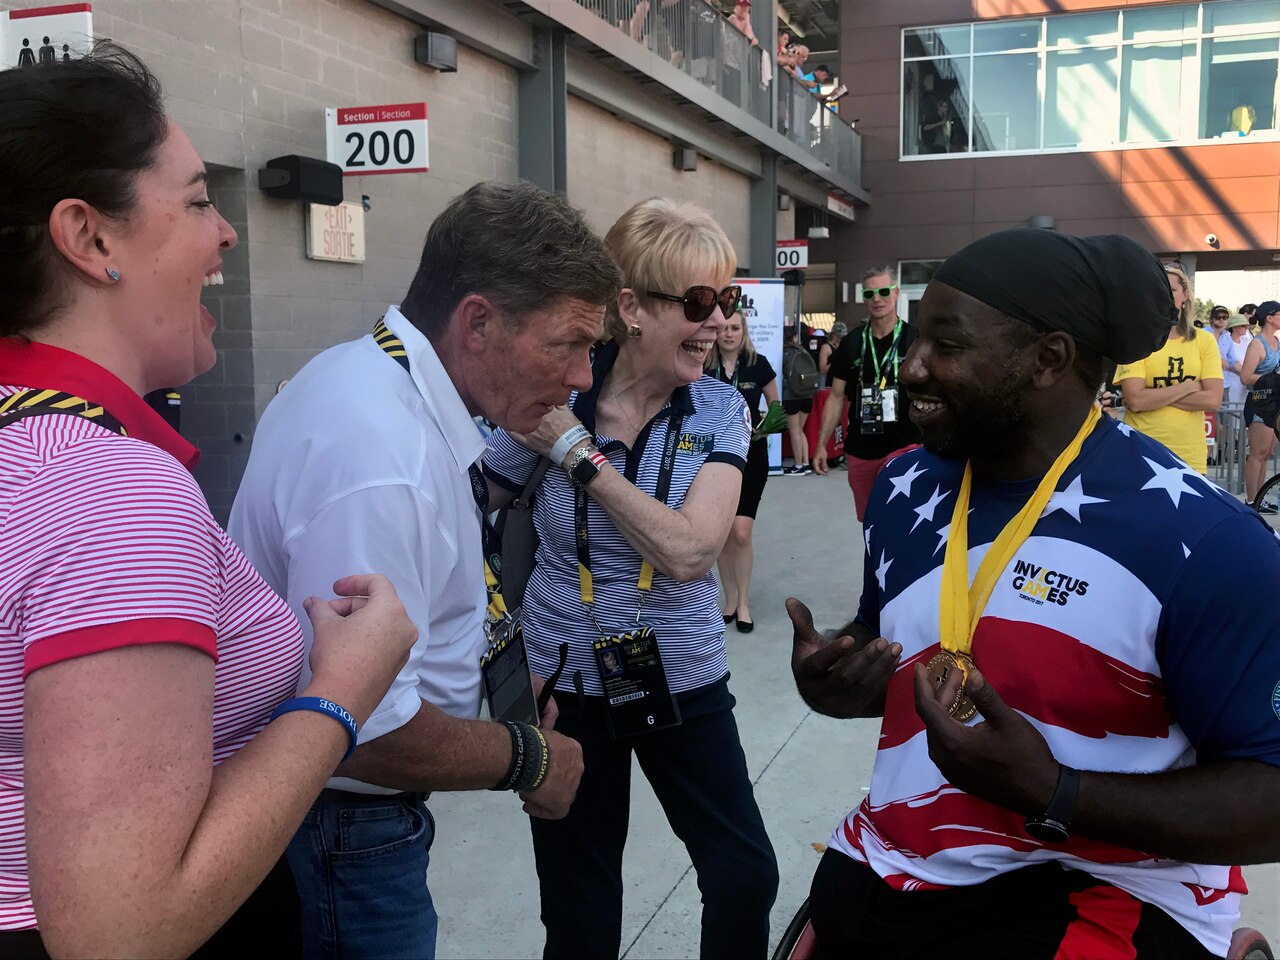 Ken Fisher, CEO and founder of Fisher House, jokes with Tony Pone, a medically retired Army specialist, after he earned gold medals in his disability category in the men’s discus and shot put during the 2017 Invictus Games in Toronto, Sept. 24, 2017. DoD photo by Shannon Collins